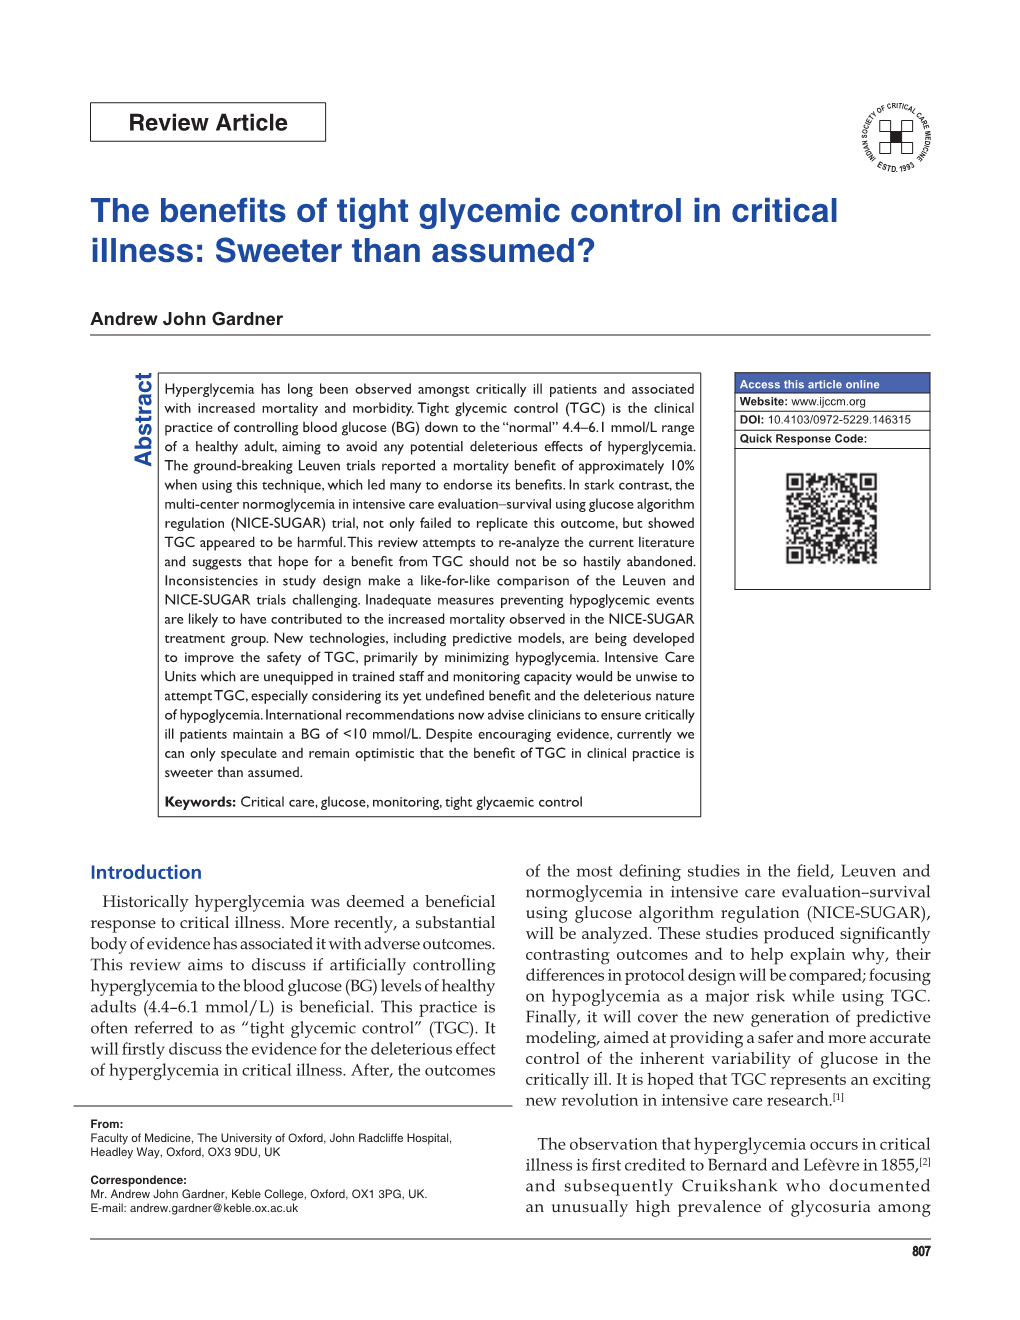 The Benefits of Tight Glycemic Control in Critical Illness